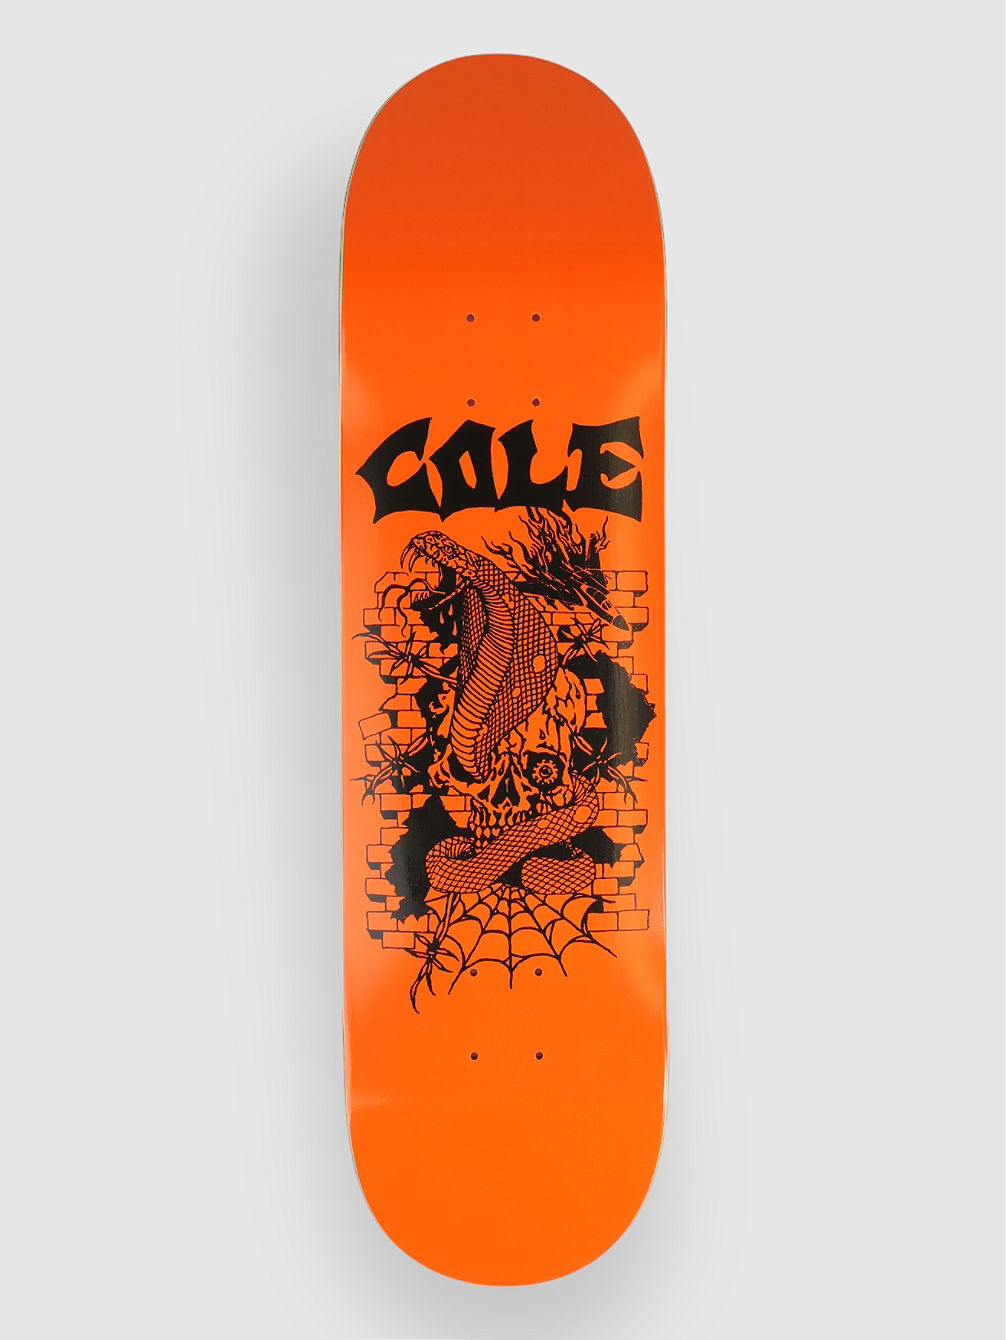 Cole End Of Time 8.25&amp;#034; Skateboard Deck